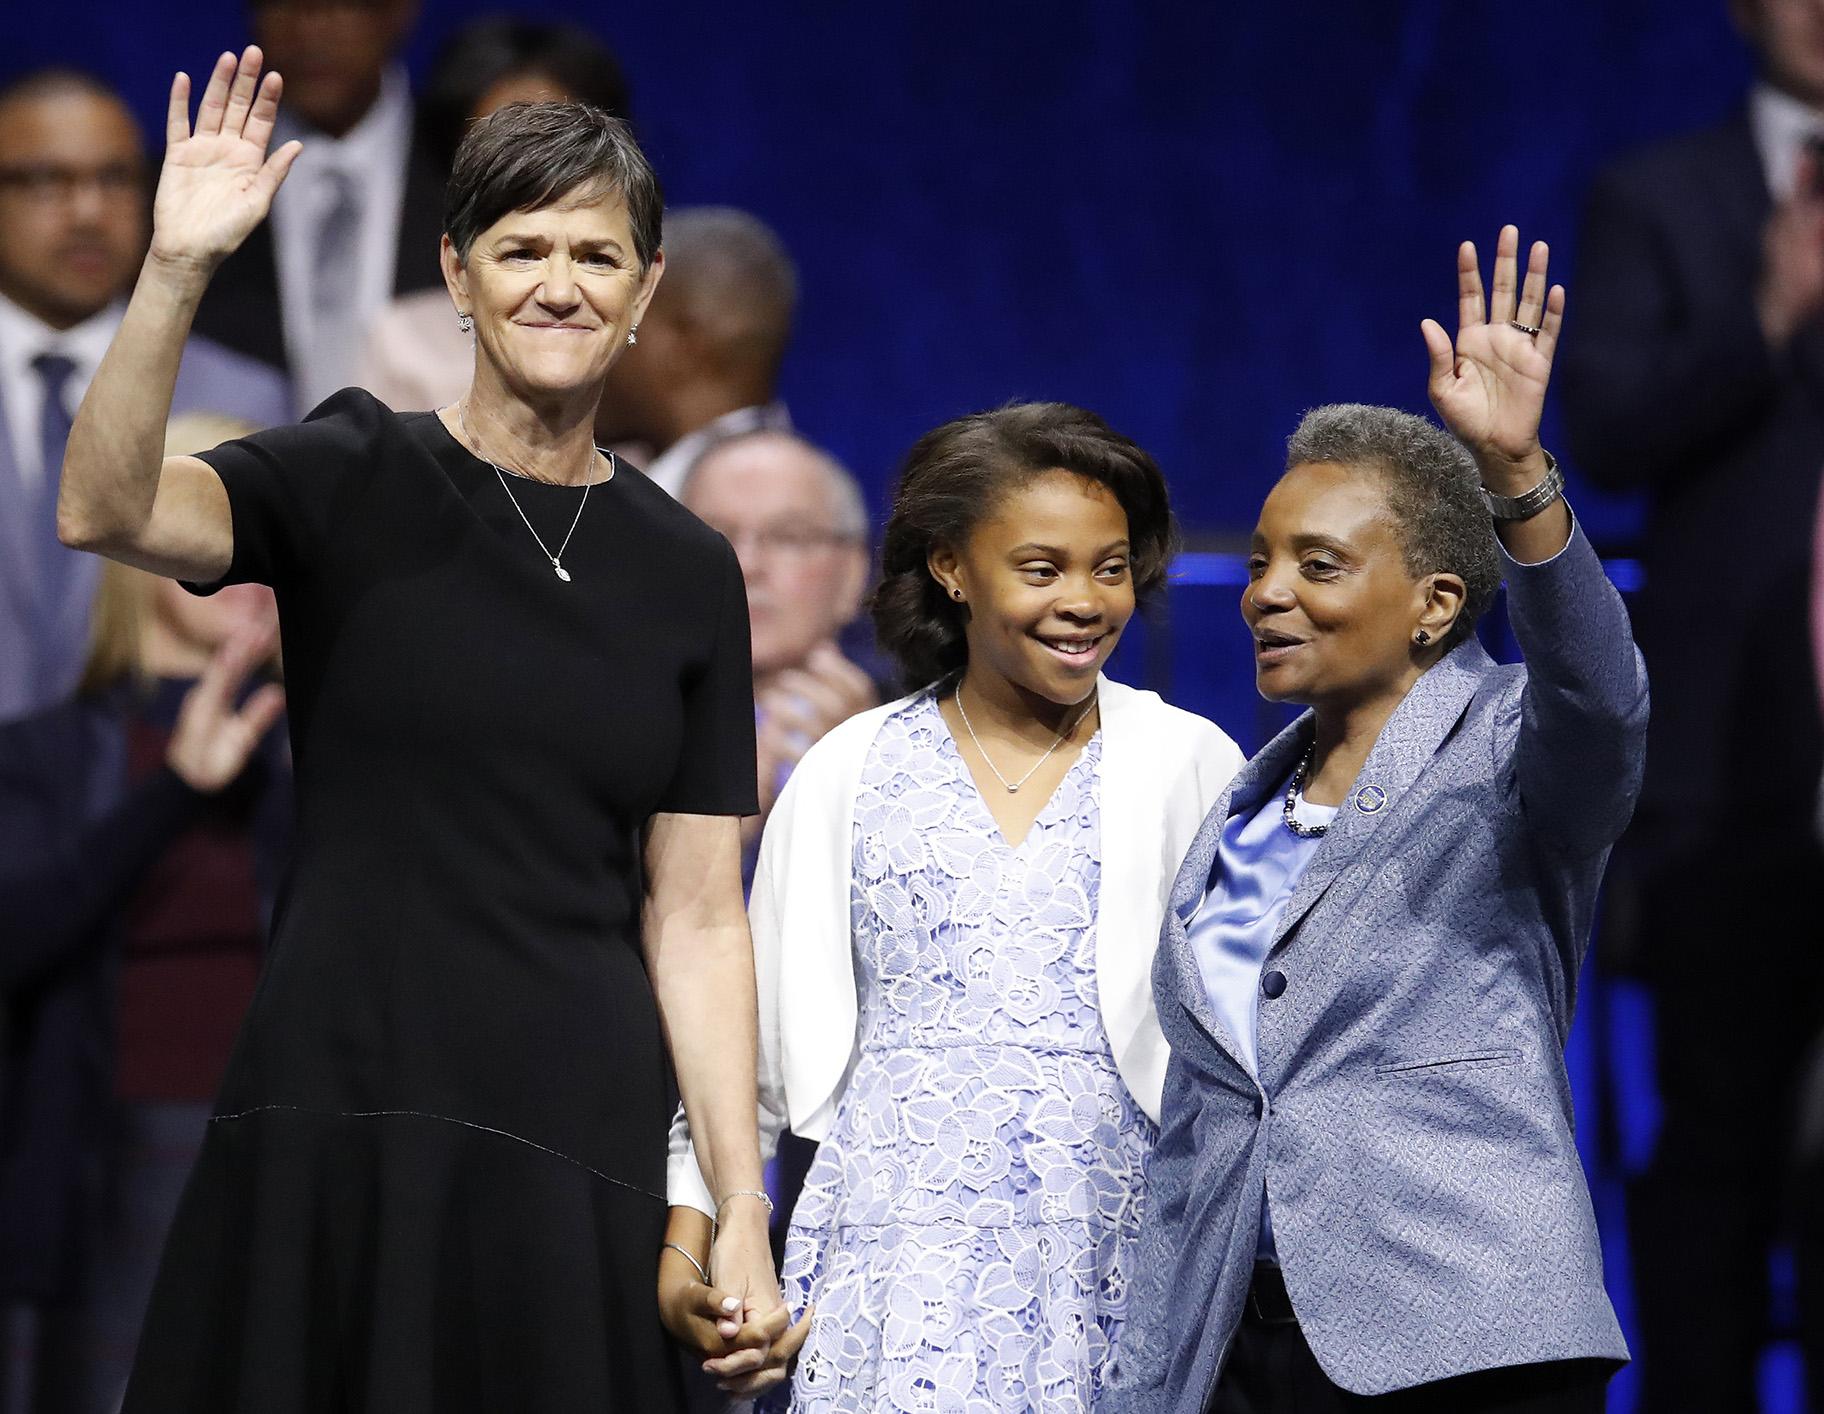 Chicago Mayor Lori Lightfoot, right, is joined on stage with her spouse Amy Eshleman, left, and her daughter Vivian during her inauguration ceremony on Monday, May 20, 2019. (AP Photo / Jim Young)